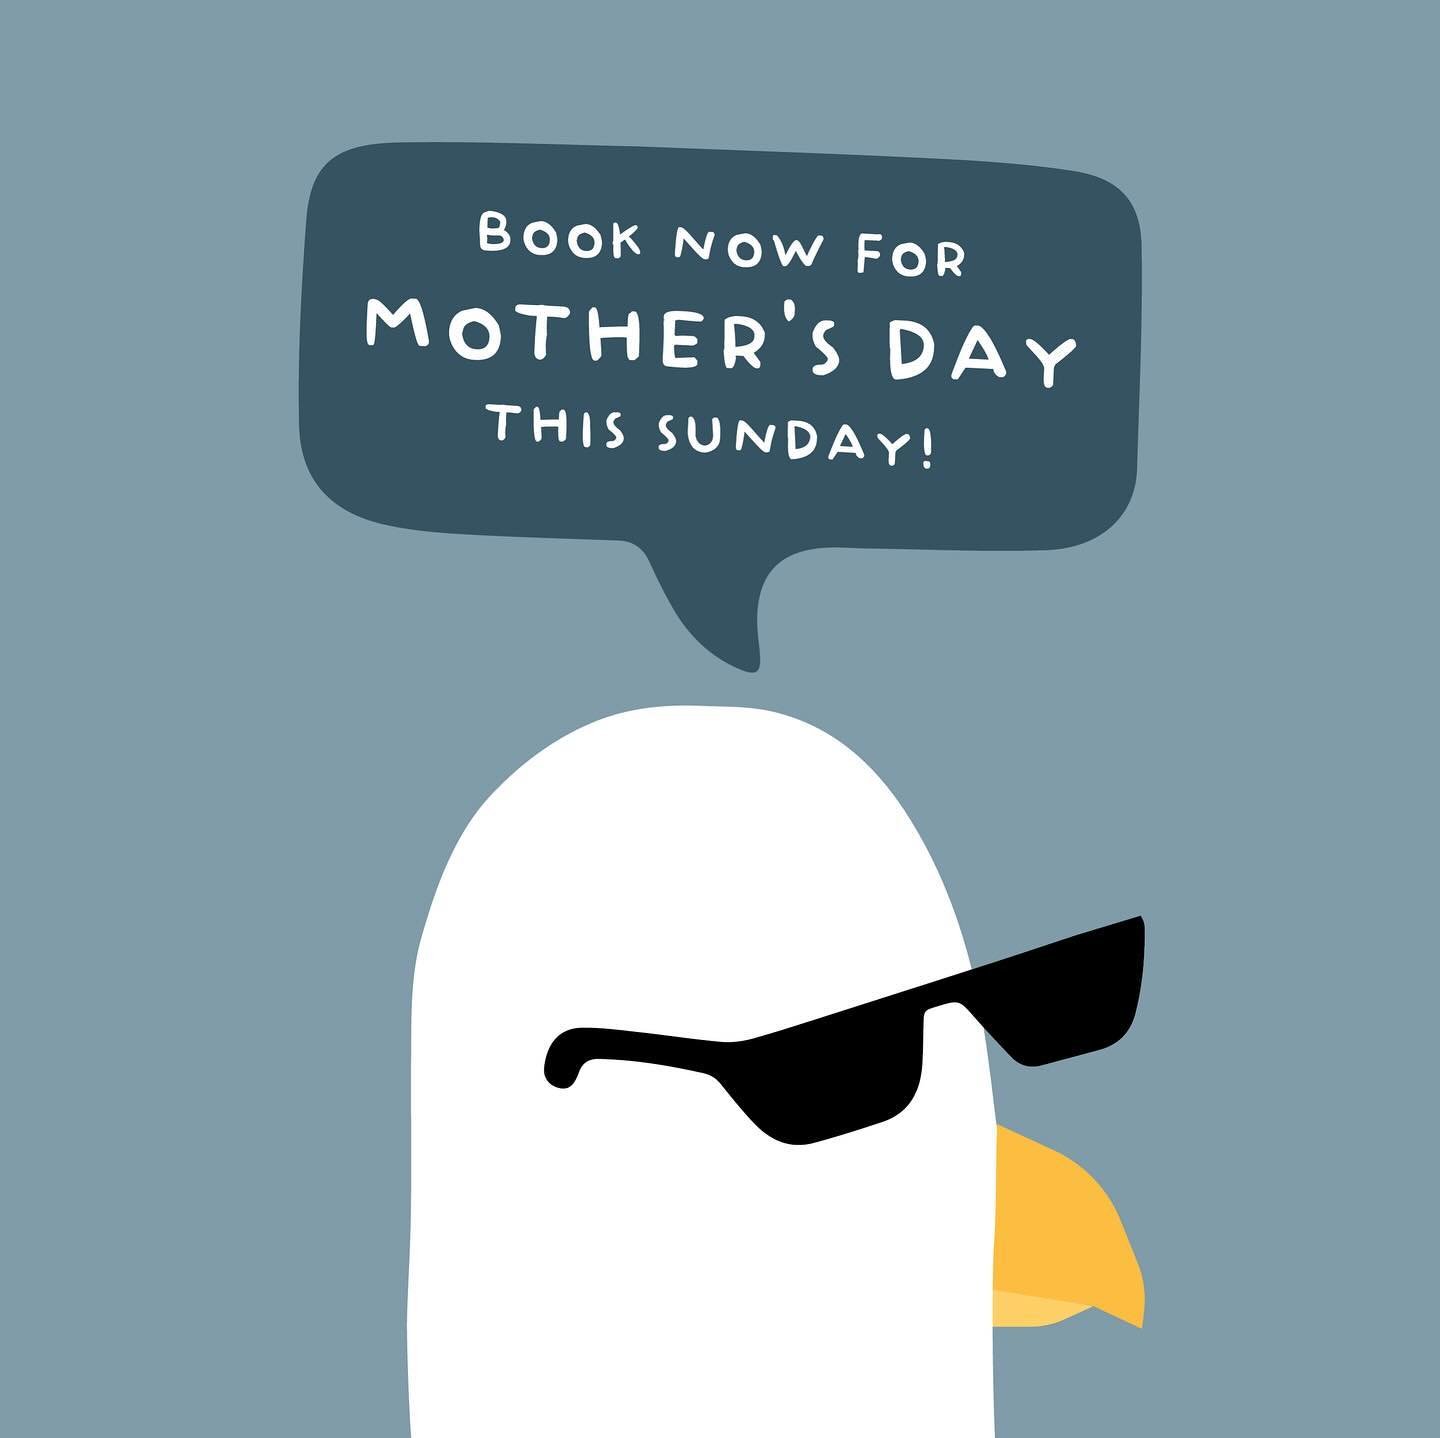 This Sunday only, we will be taking bookings for Mother&rsquo;s Day! We highly recommend you to book with us as walk-in spaces will not be guaranteed.

To make a booking please email us at hello@perrys.club with the number of people and preferred tim